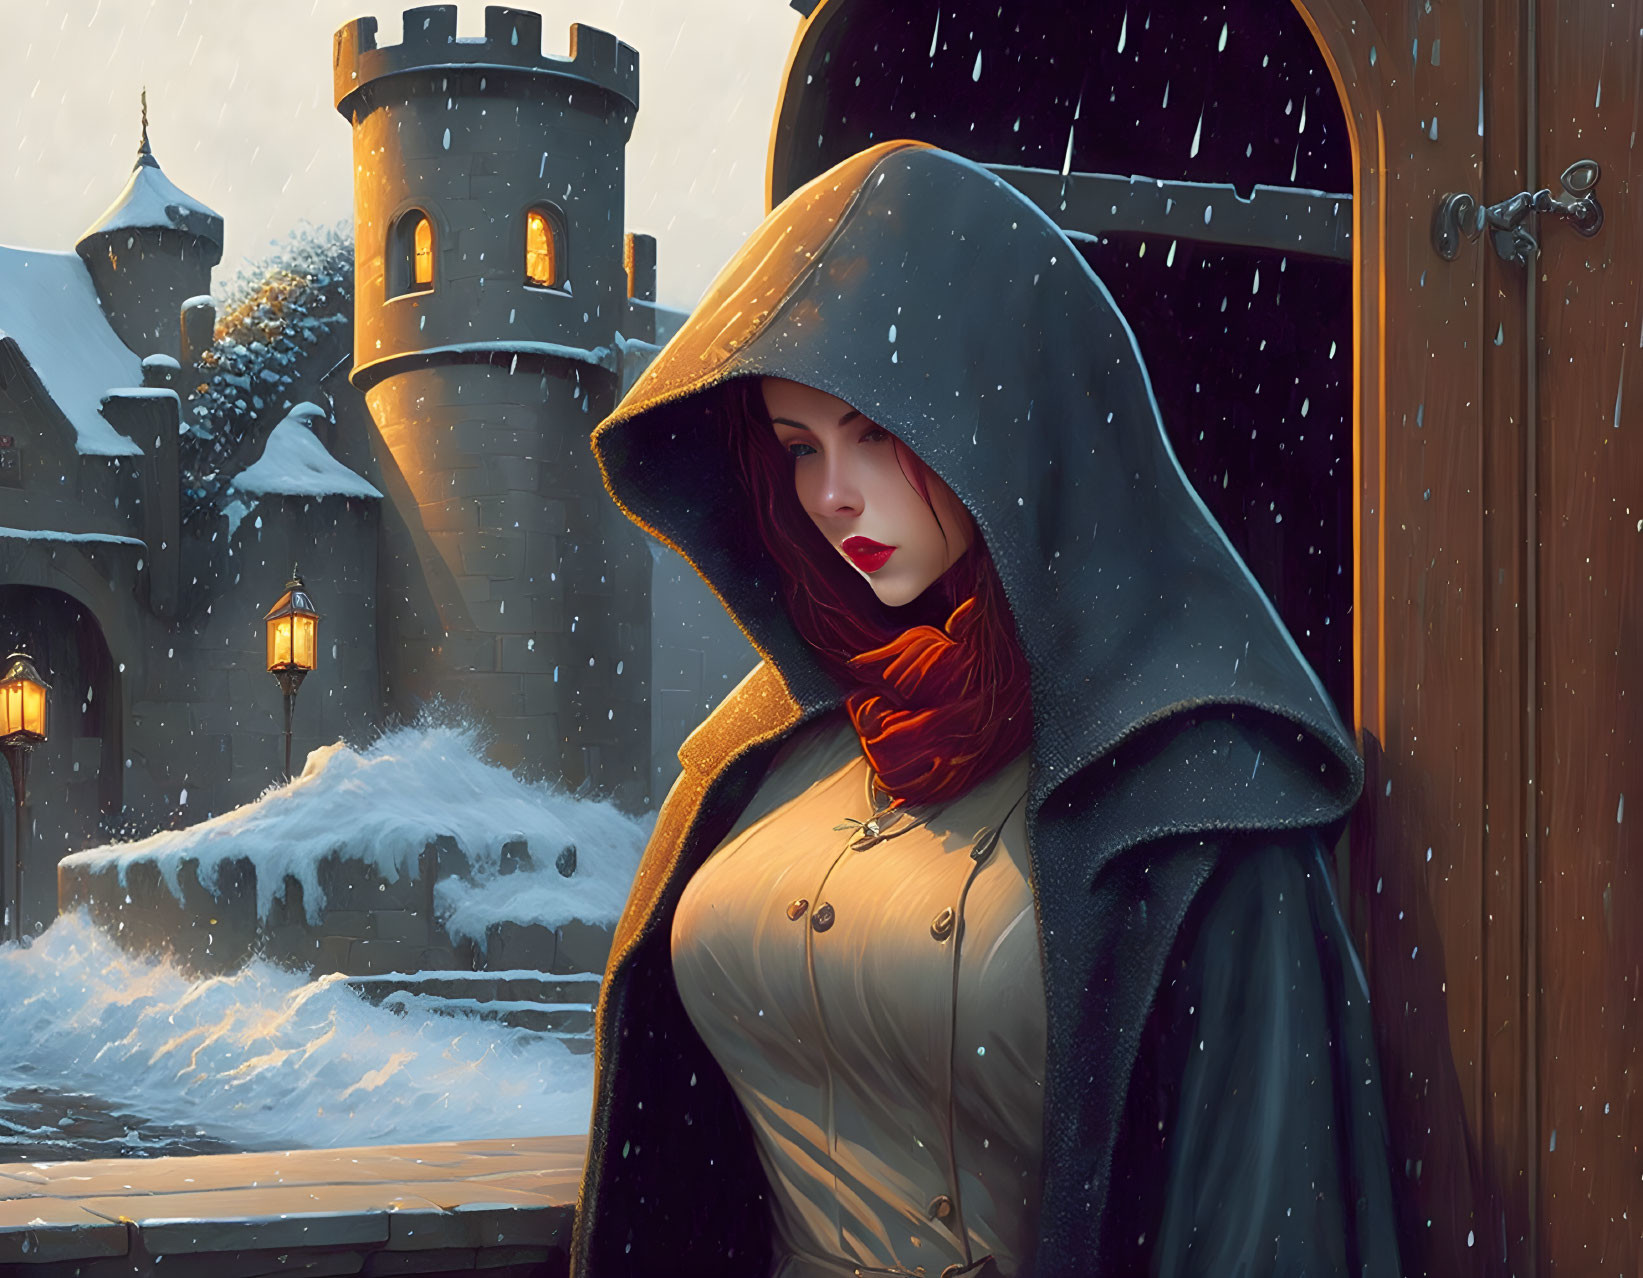 Cloaked figure at snowy castle gate in thoughtful pose